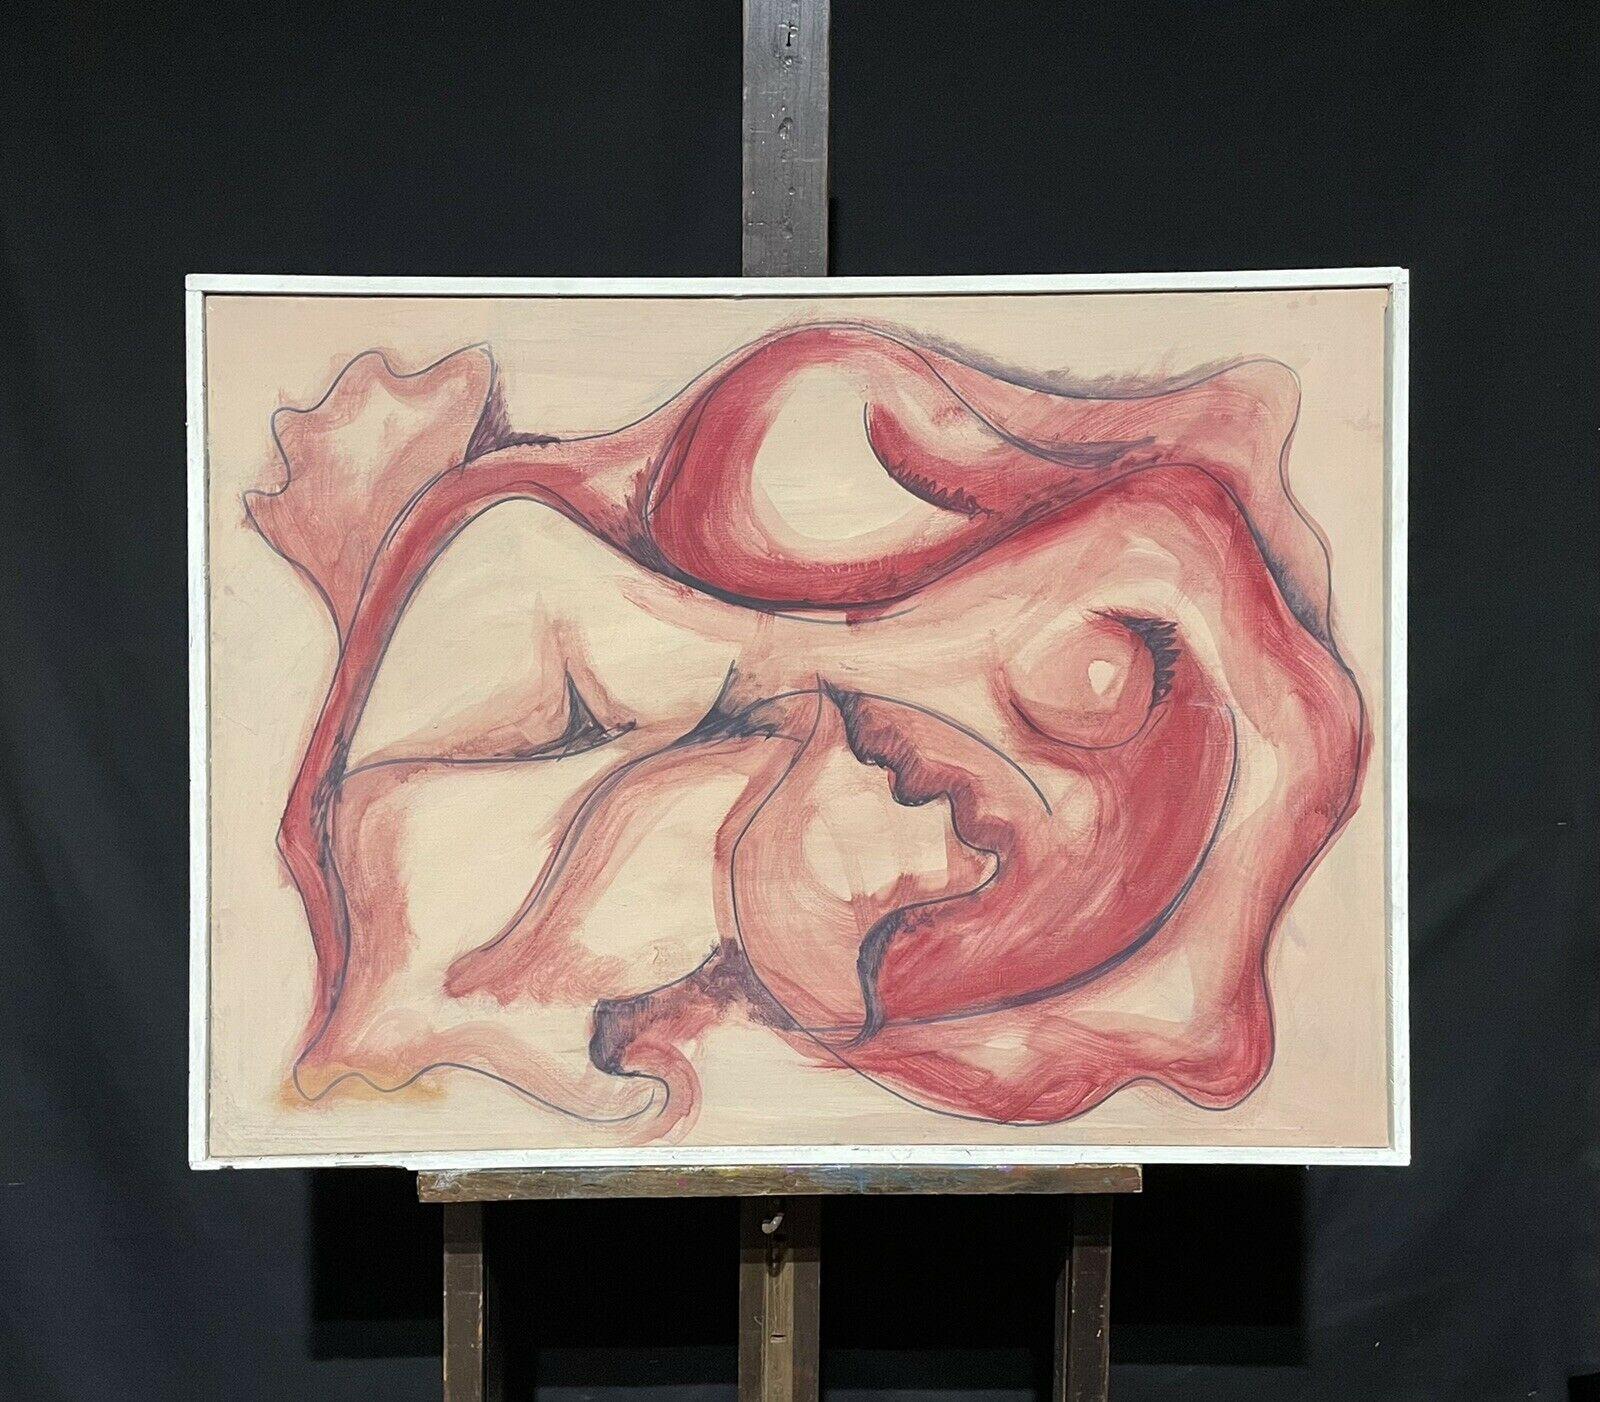 HUGE MID CENTURY FRENCH ABSTRACT PAINTING - NUDE FIGURE COMPOSITION IN PINK - Painting by Marcel Lucquet